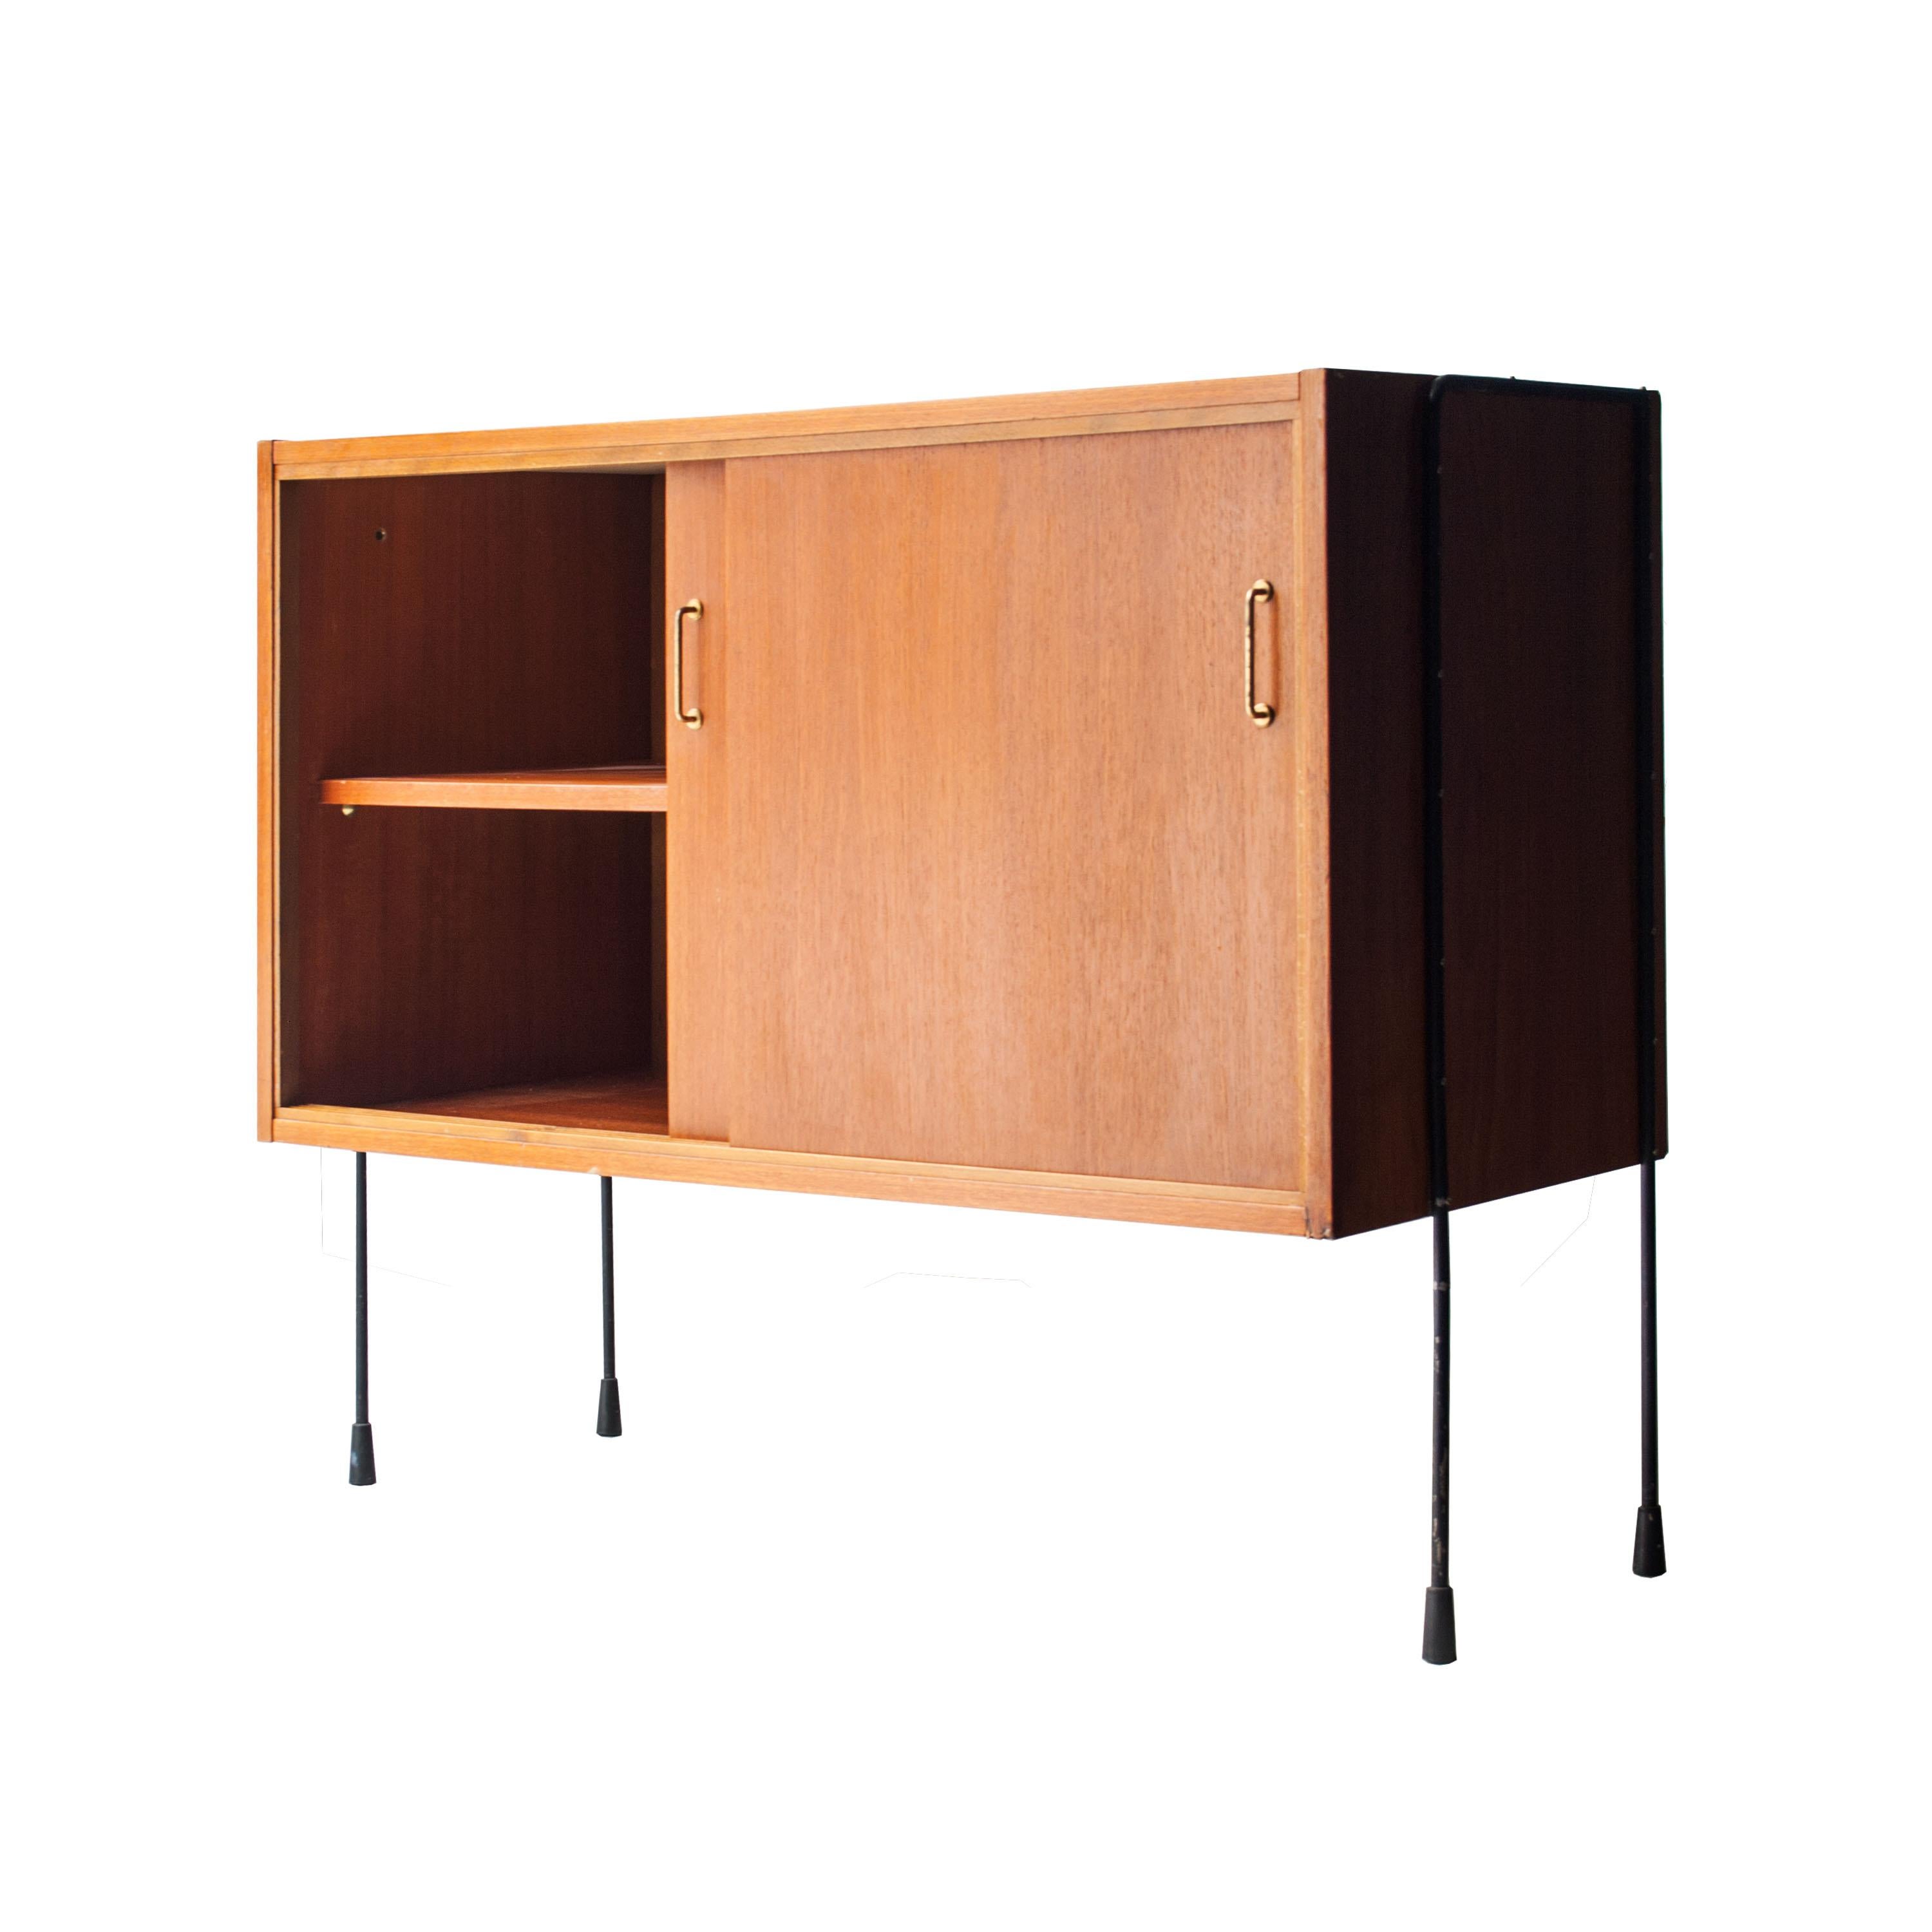 Sideboard with rosewood structure, two sliding doors and rectangular handles. Conical metal lacquered in black legs.